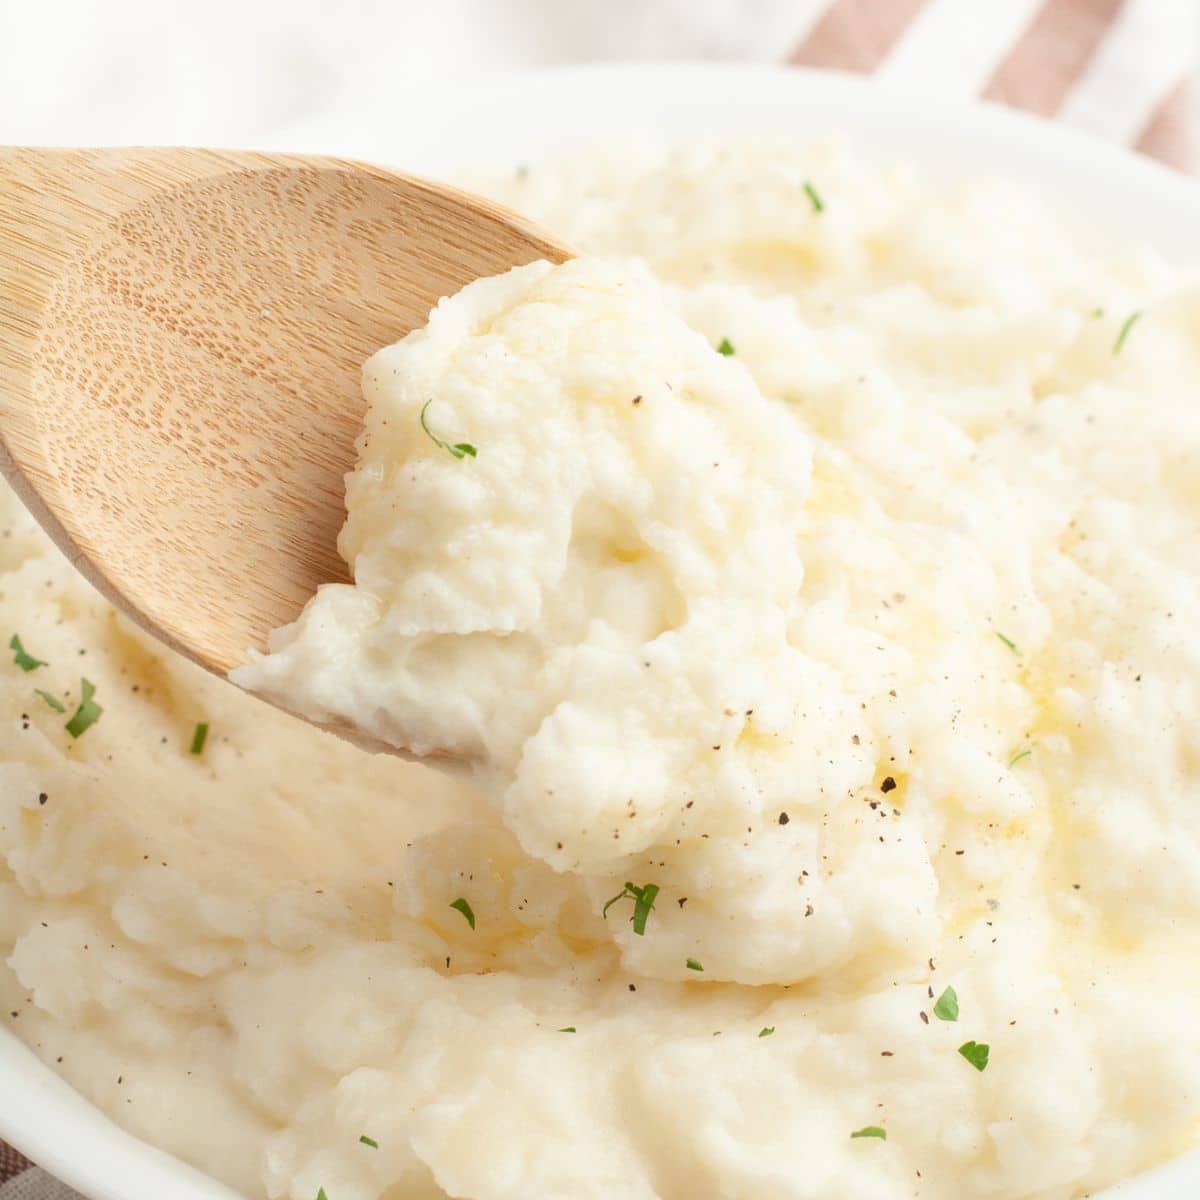 Wooden spoon with mashed potatoes.